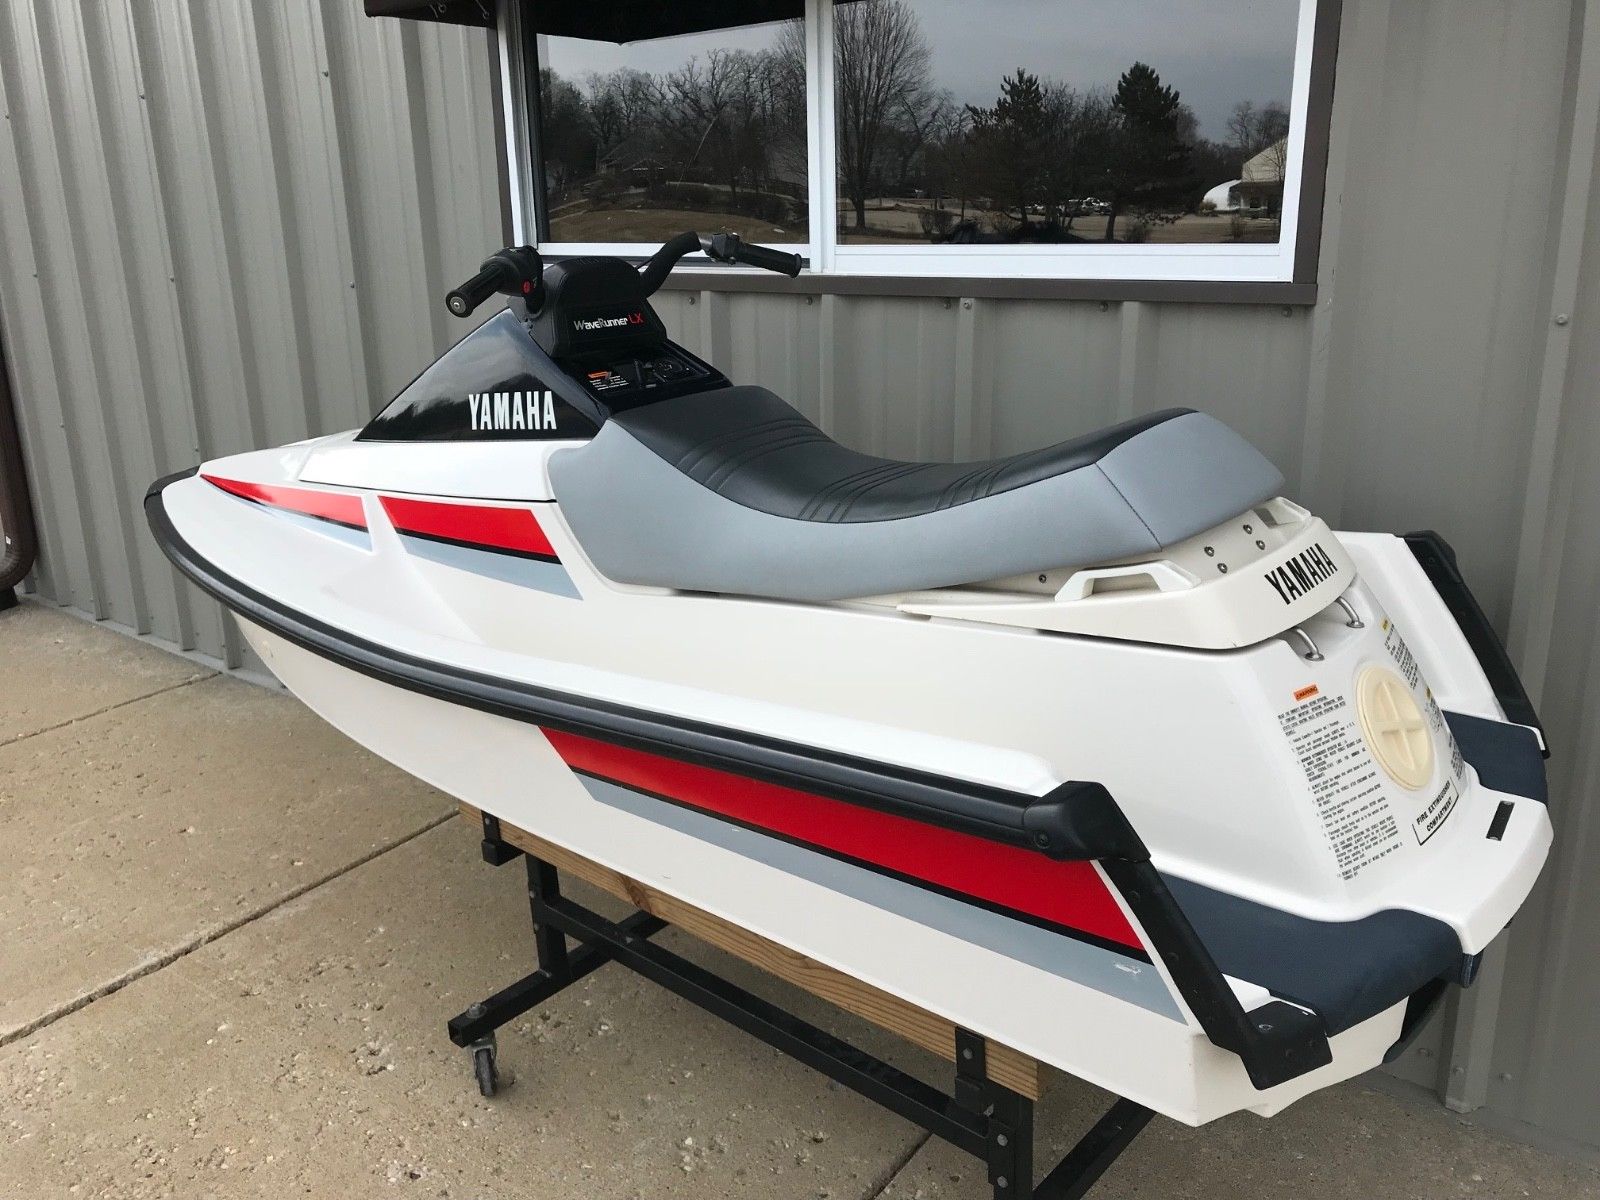 Yamaha Wave Runner 1990 for sale for $500 - Boats-from-USA.com